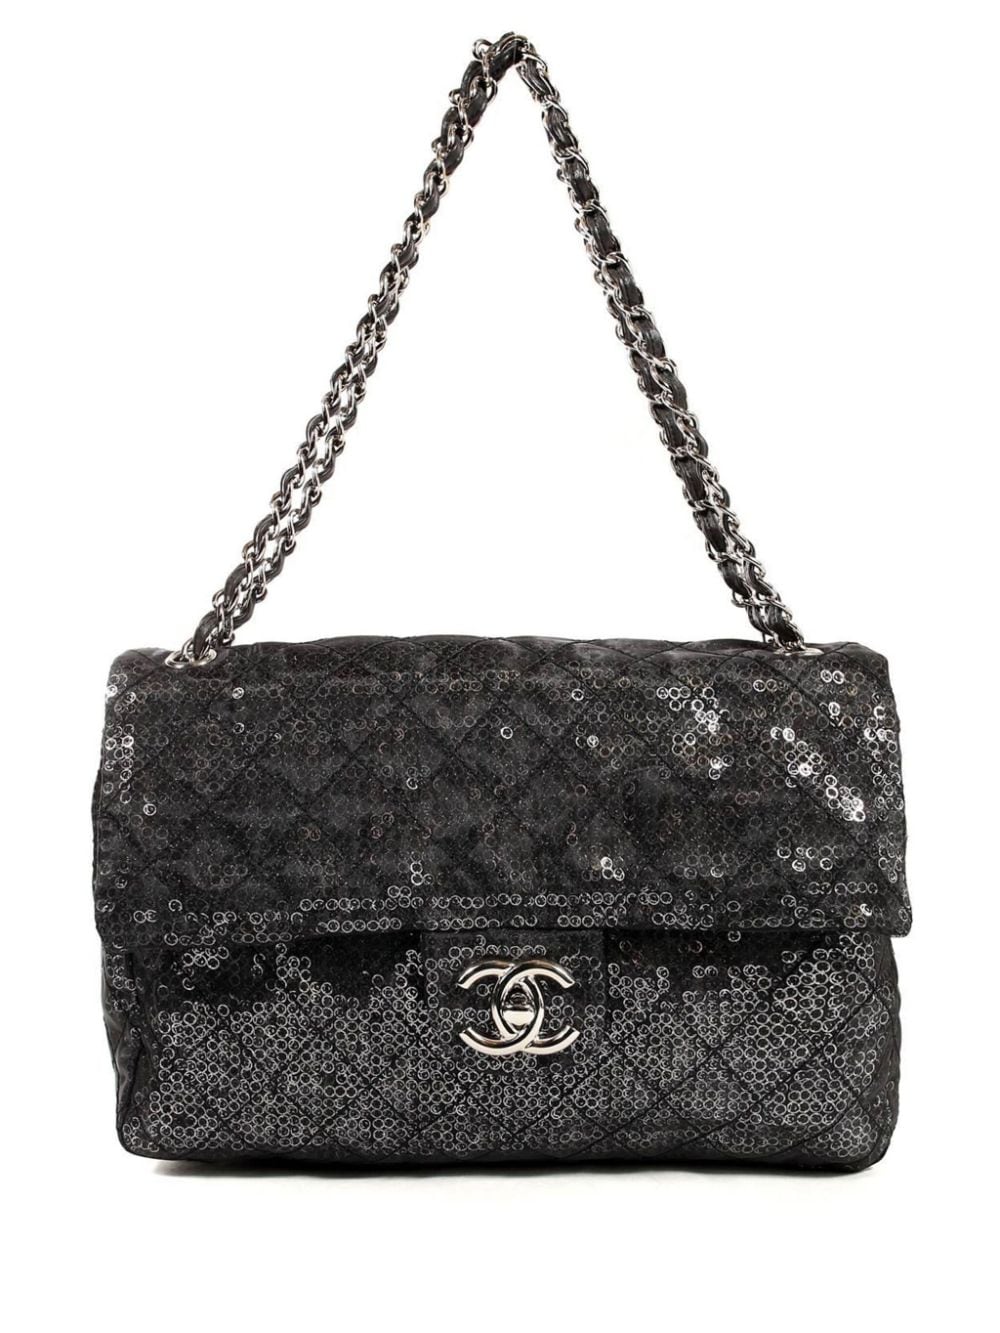 CHANEL Pre-Owned 2009 Jumbo Classic Flap Schultertasche - Schwarz von CHANEL Pre-Owned